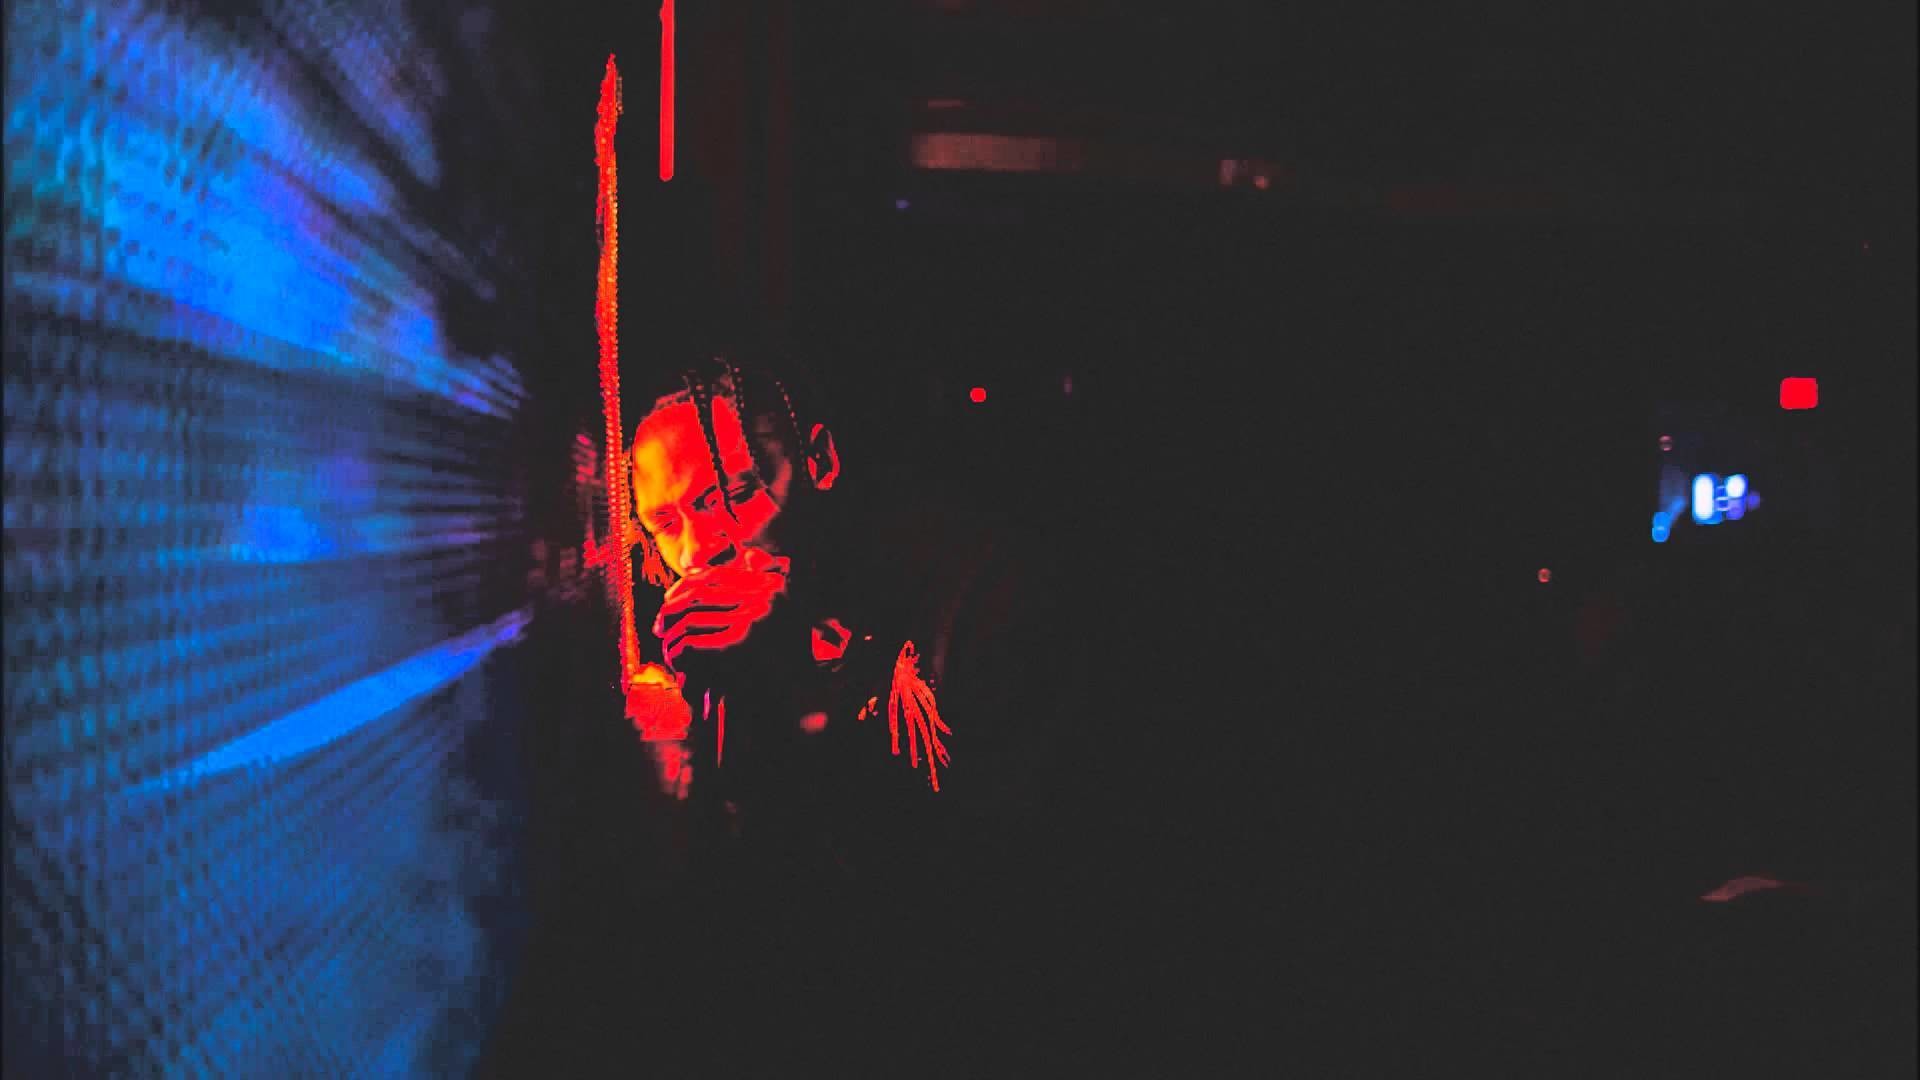 1920x1080 For Travi$ Scott, life is just one big circus. Under a full moon, La Flame  parades through abandoned circus grounds in his dark trippy visual.